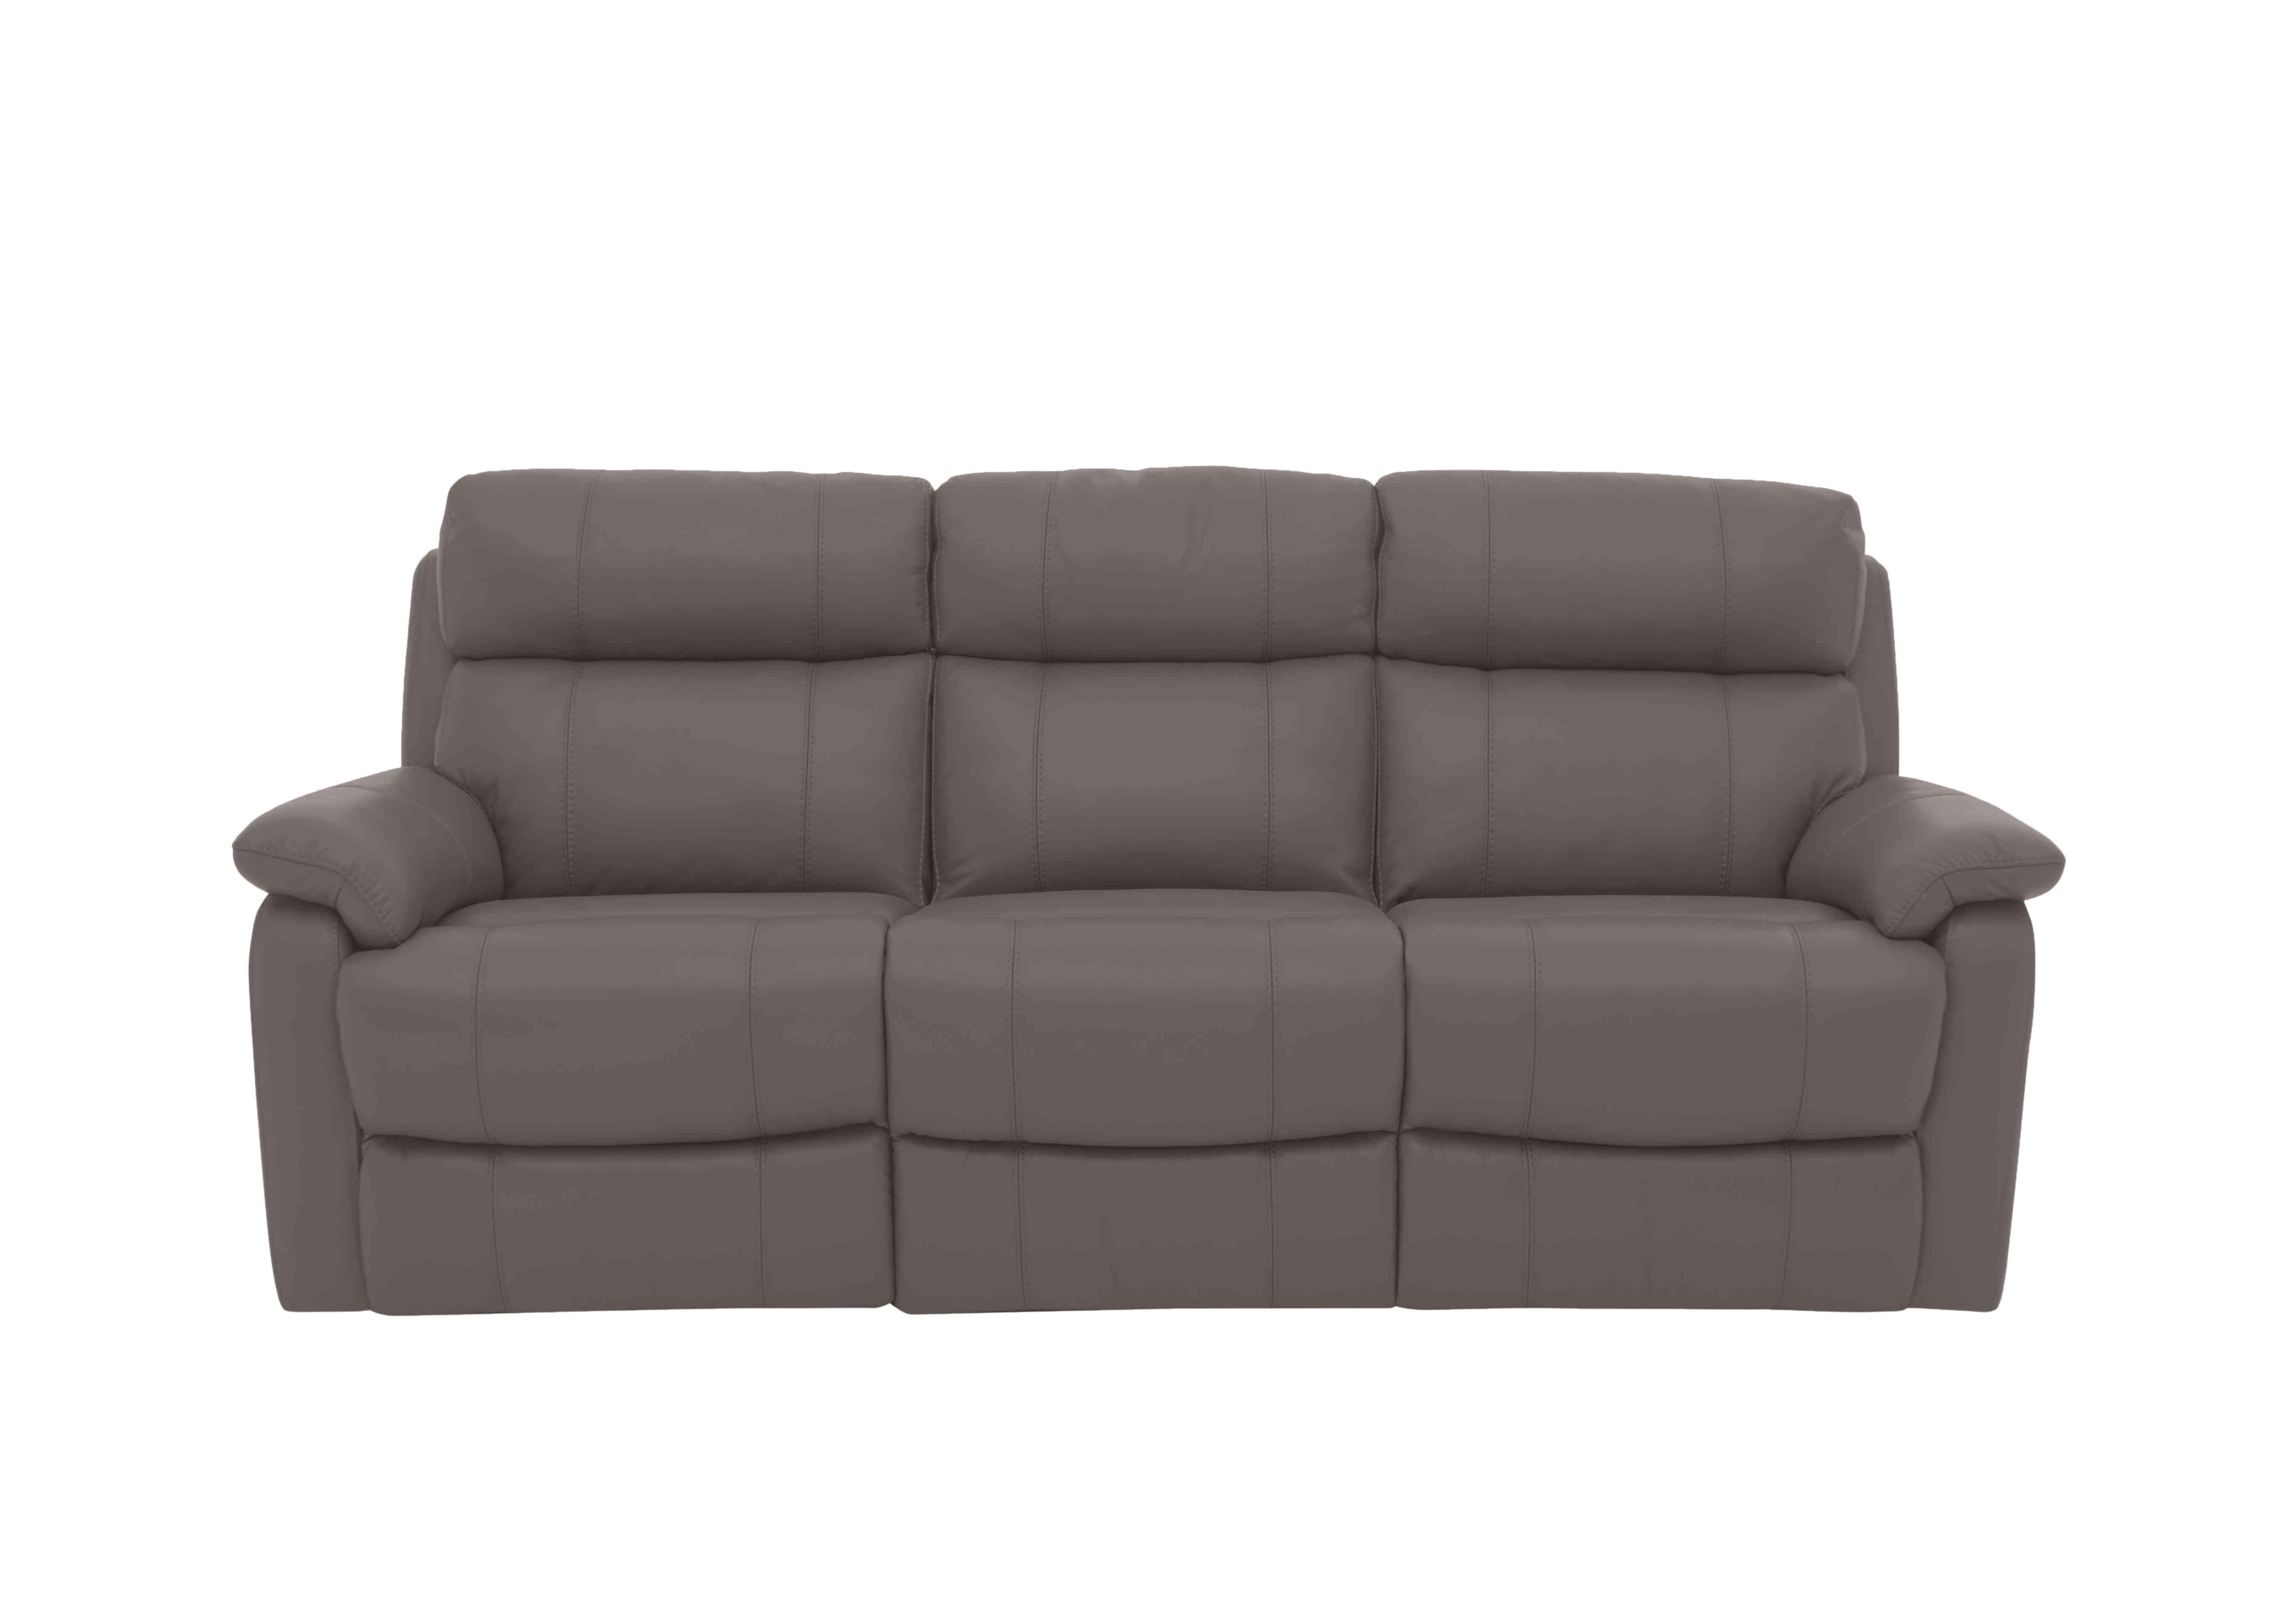 Relax Station Komodo 3 Seater Power Leather Sofa in Bv-042e Elephant on Furniture Village